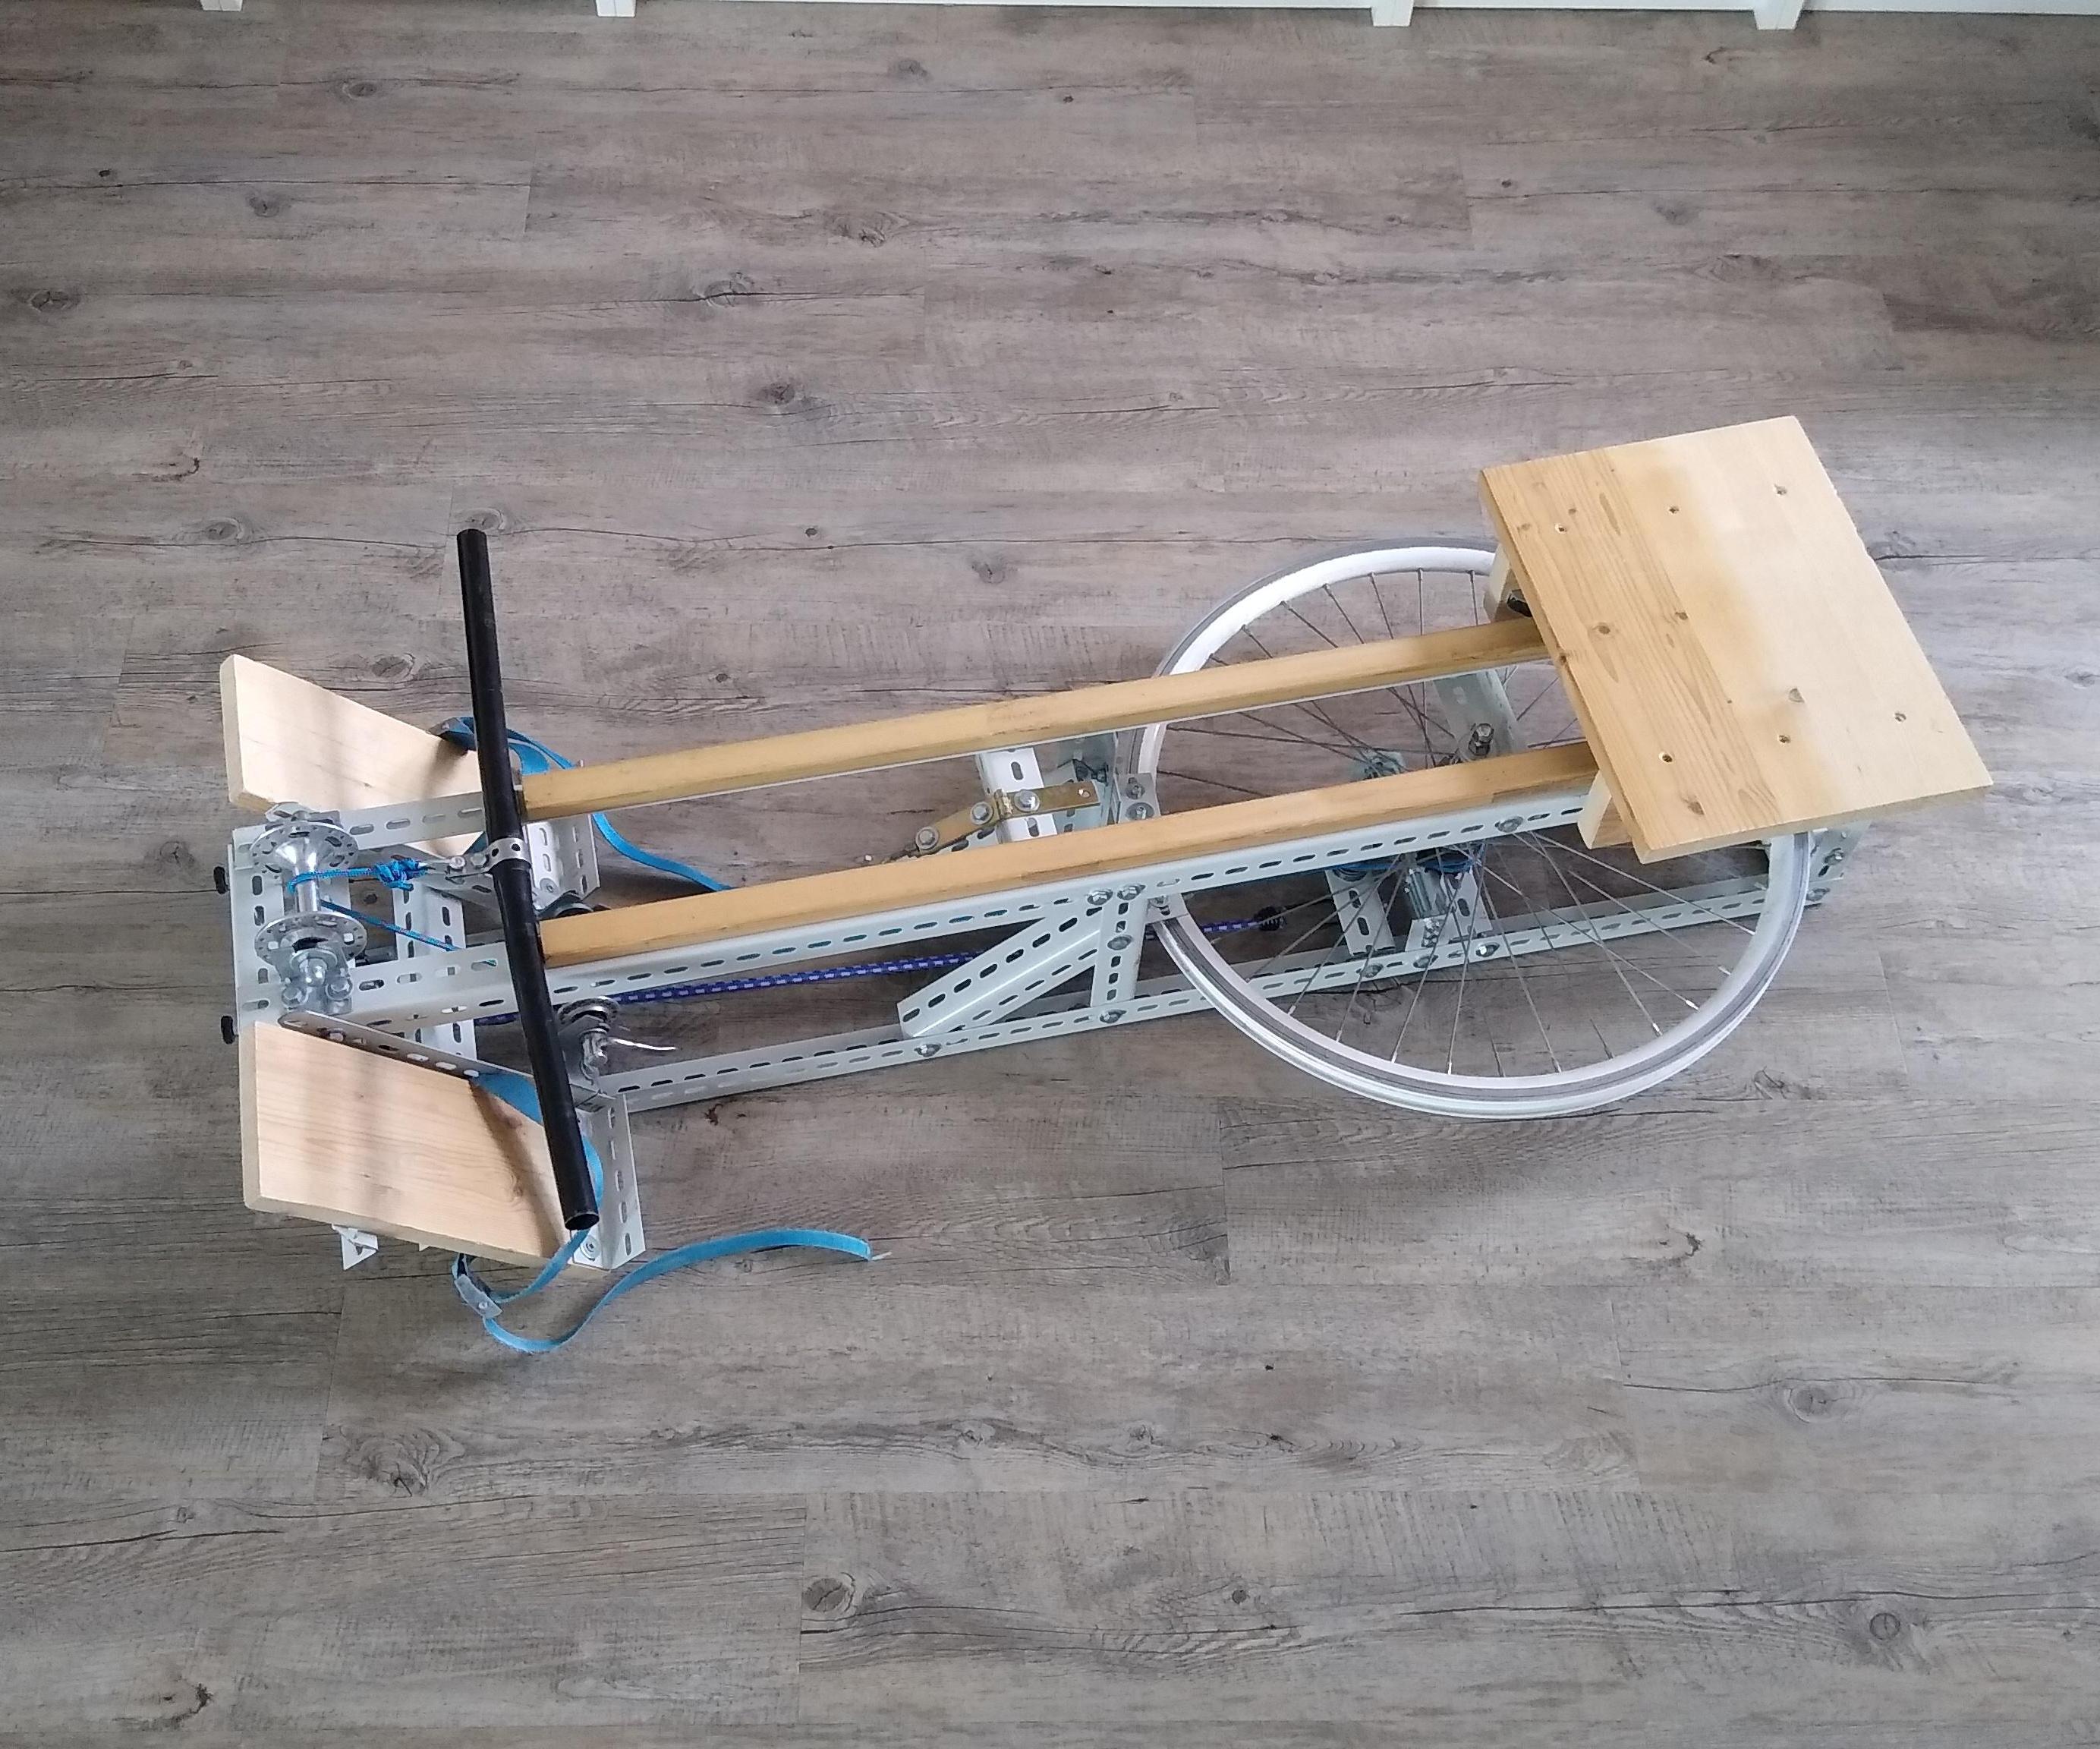 The RatRodRower - a Rowing Machine From Used Bike Parts